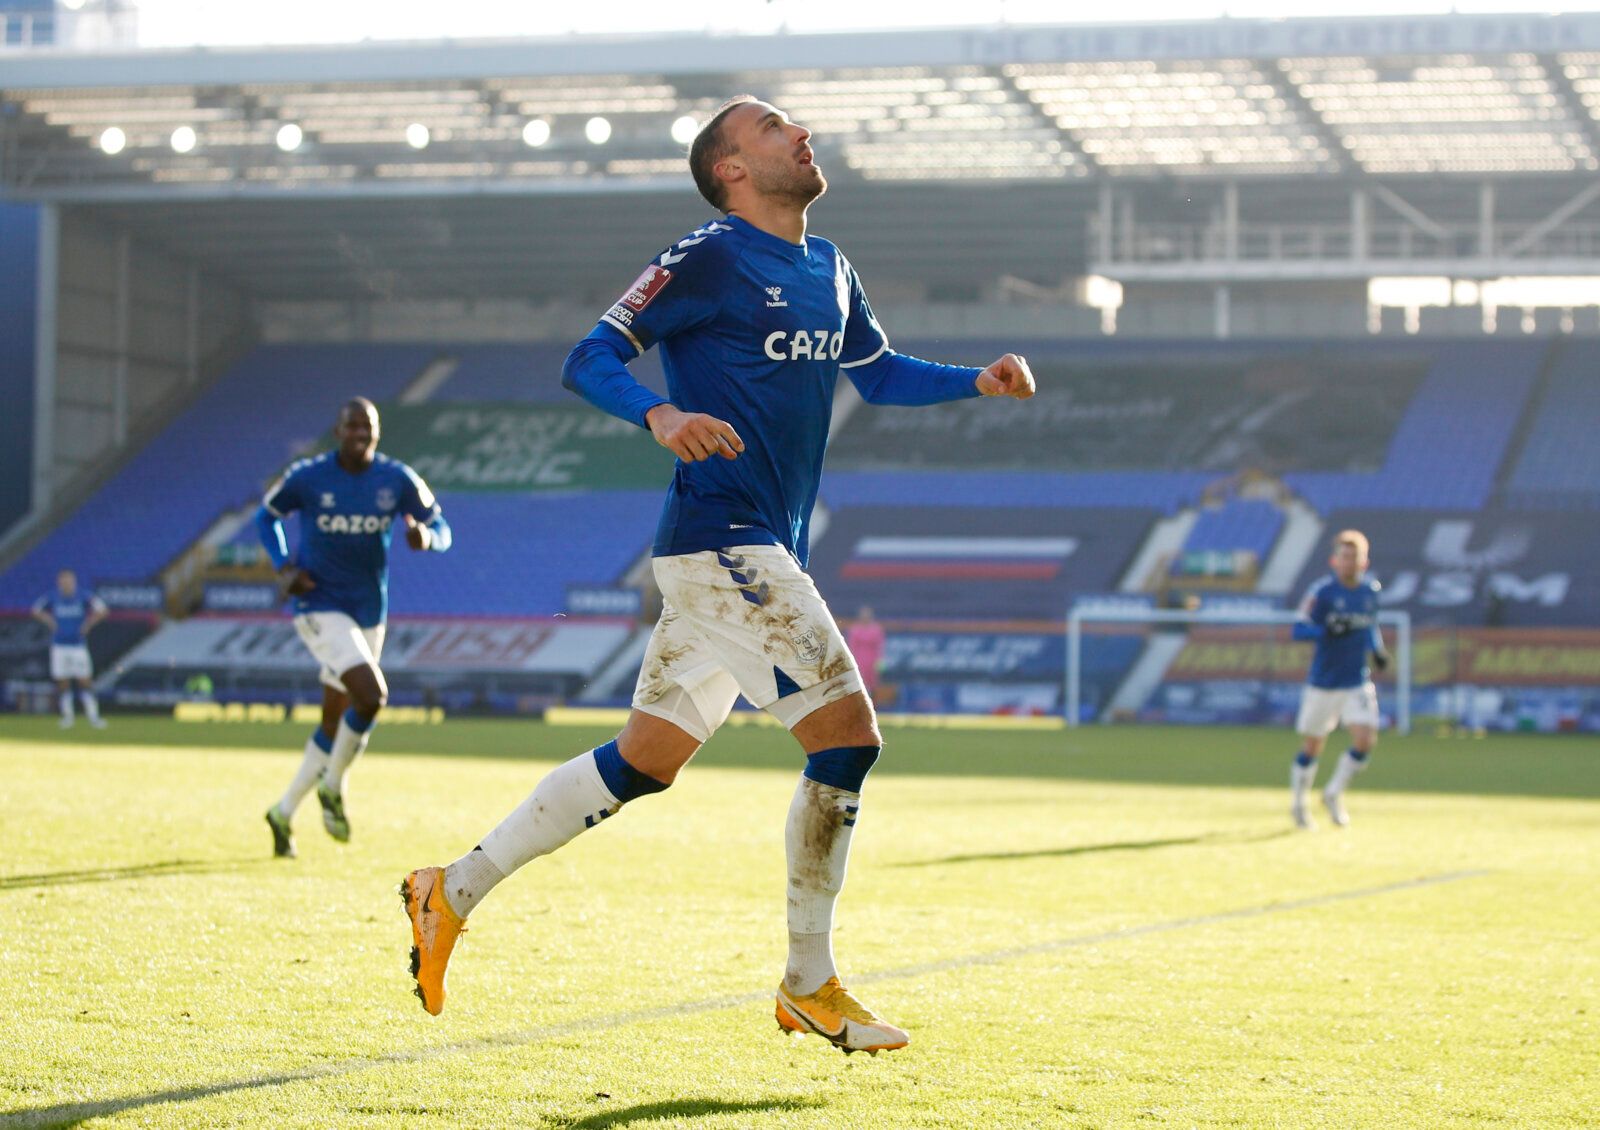 Soccer Football - FA Cup Third Round - Everton v Rotherham United - Goodison Park, Liverpool, Britain - January 9, 2021 Everton's Cenk Tosun celebrates scoring a goal that is later disallowed REUTERS/Phil Noble